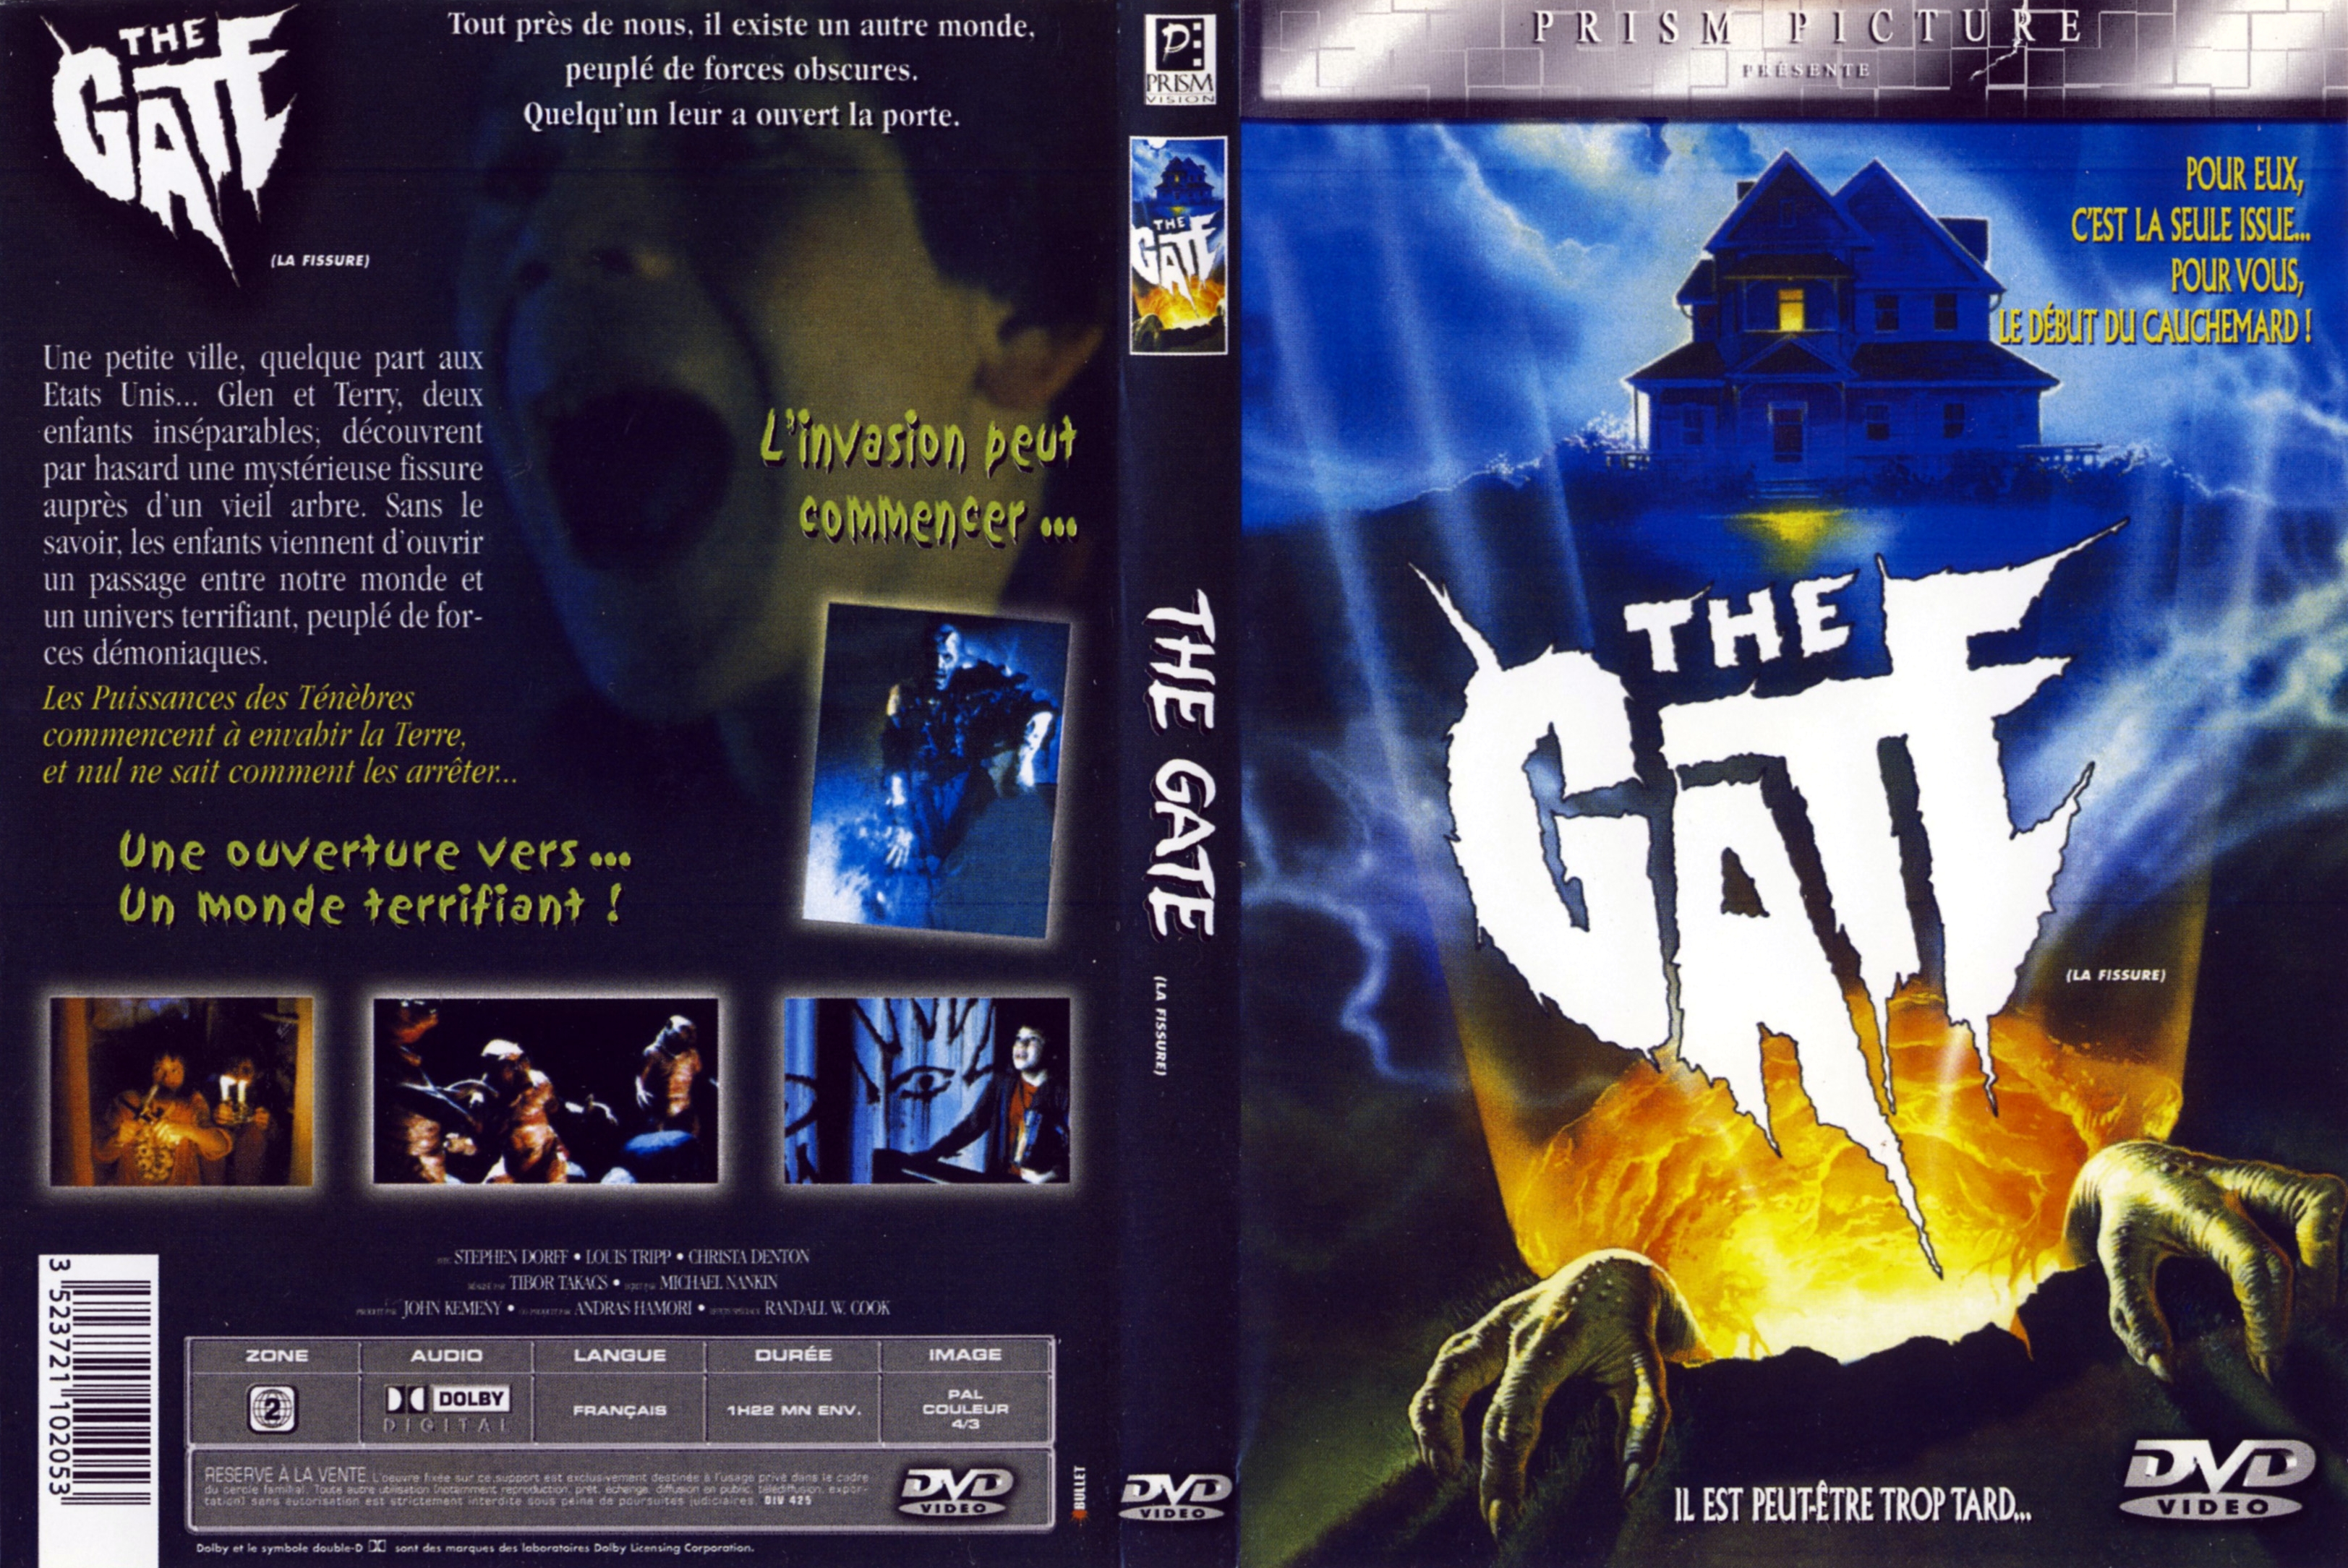 Jaquette DVD The gate v2